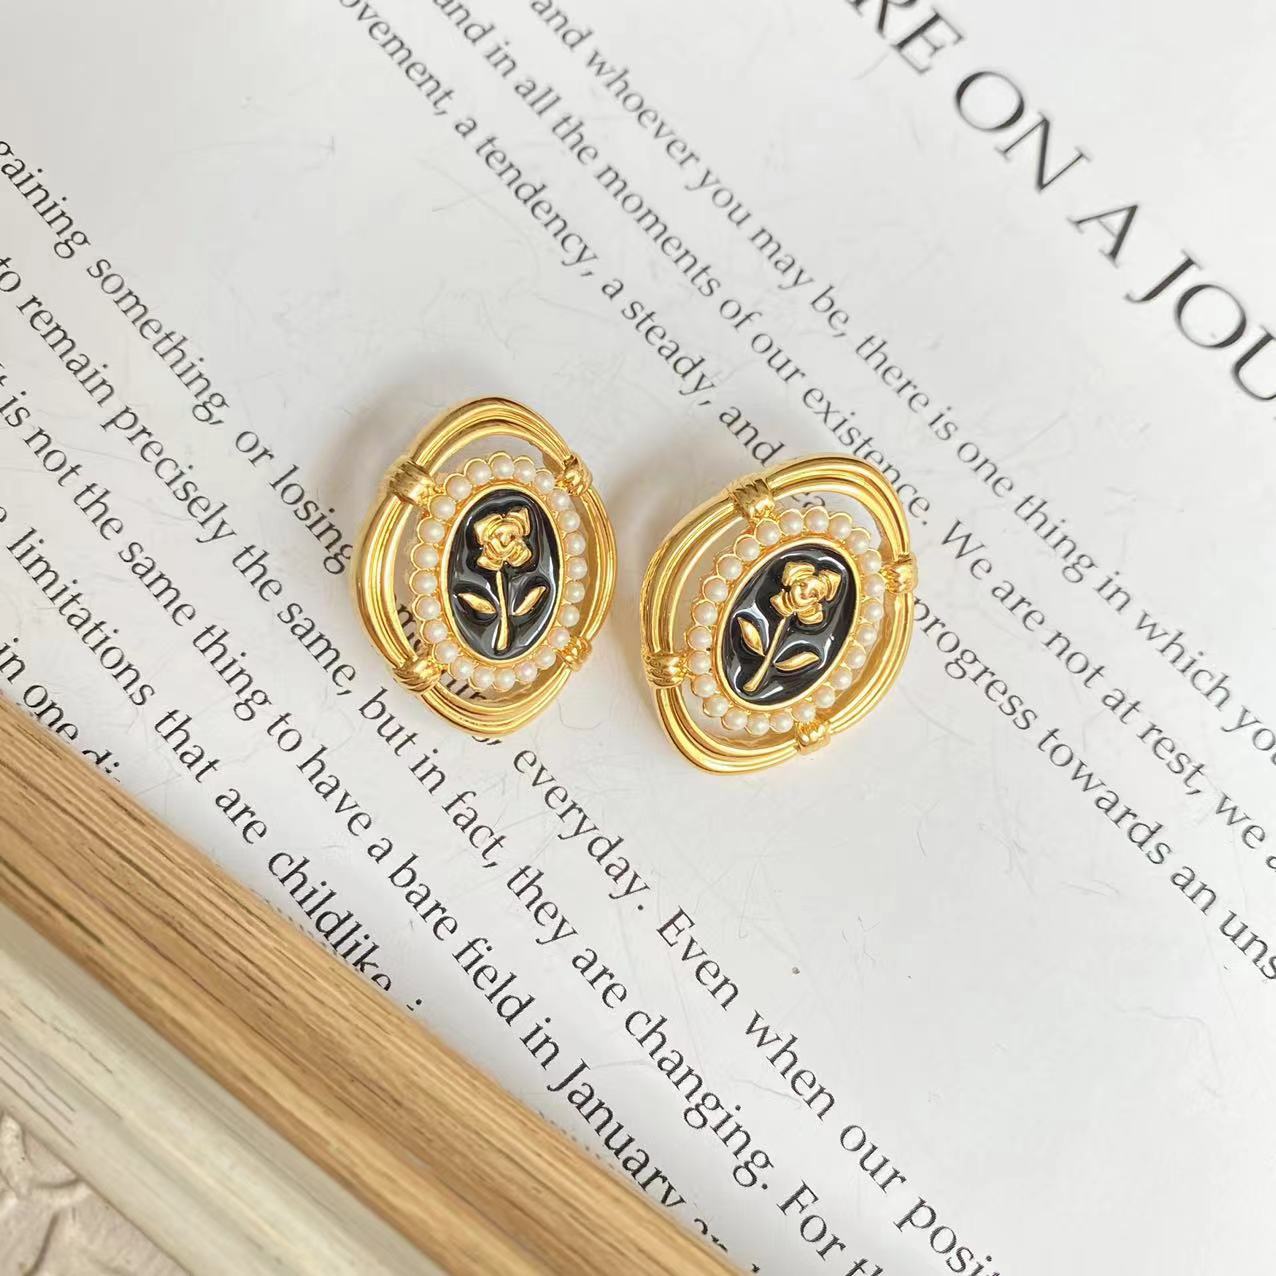 Vintage 3D Rose Elegant Earrings with Pearl and Gold Trim